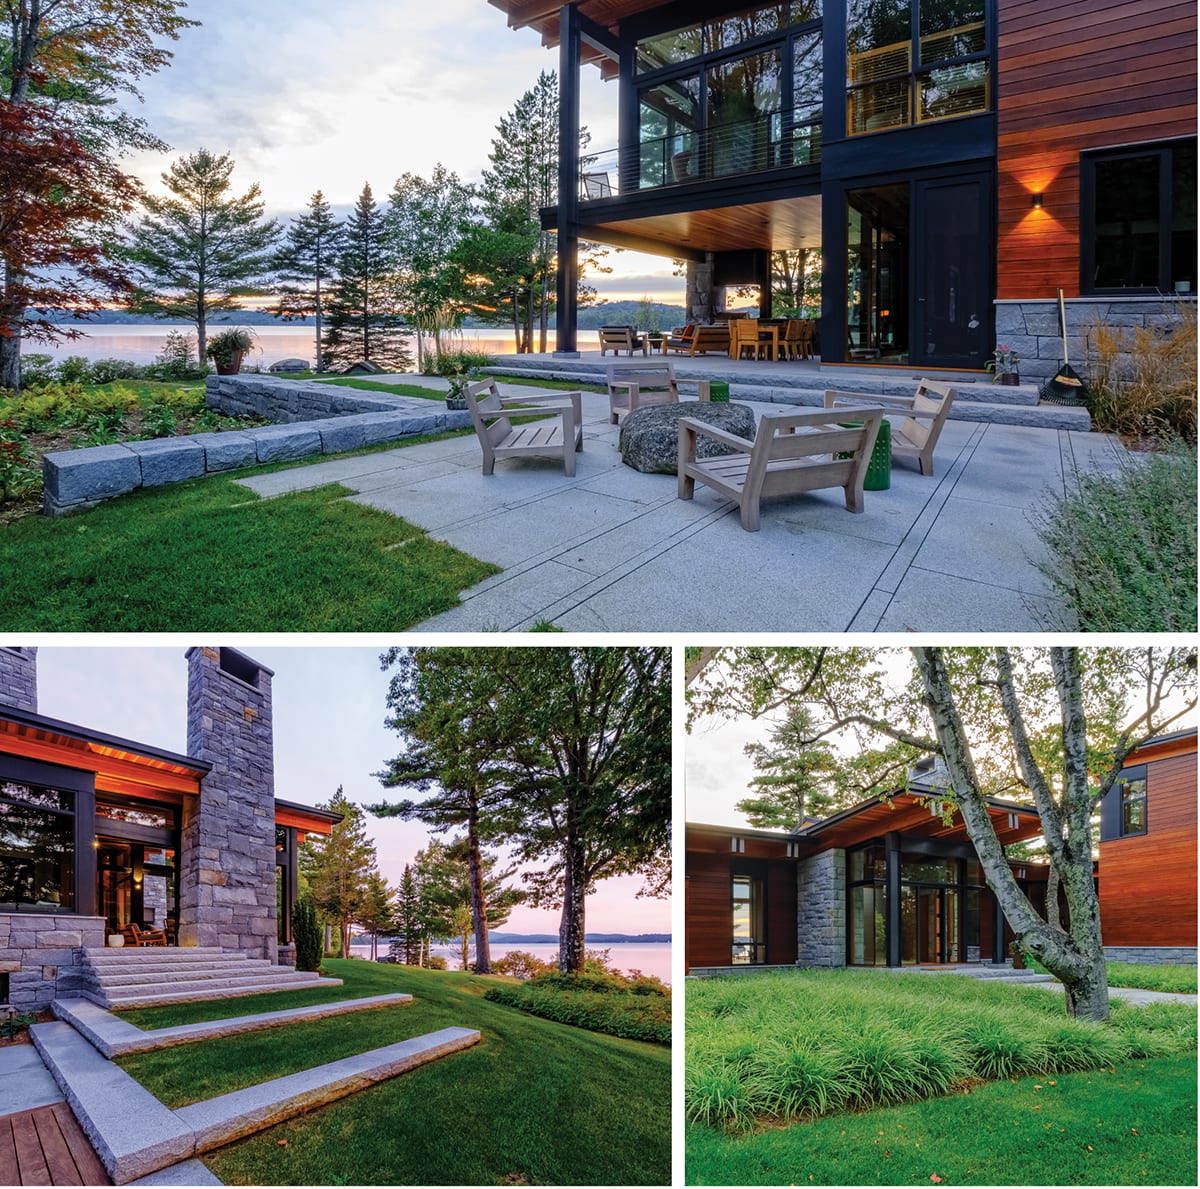 The exterior of a New Hampshire lake house plus photos of the green lawn and modern architecture.